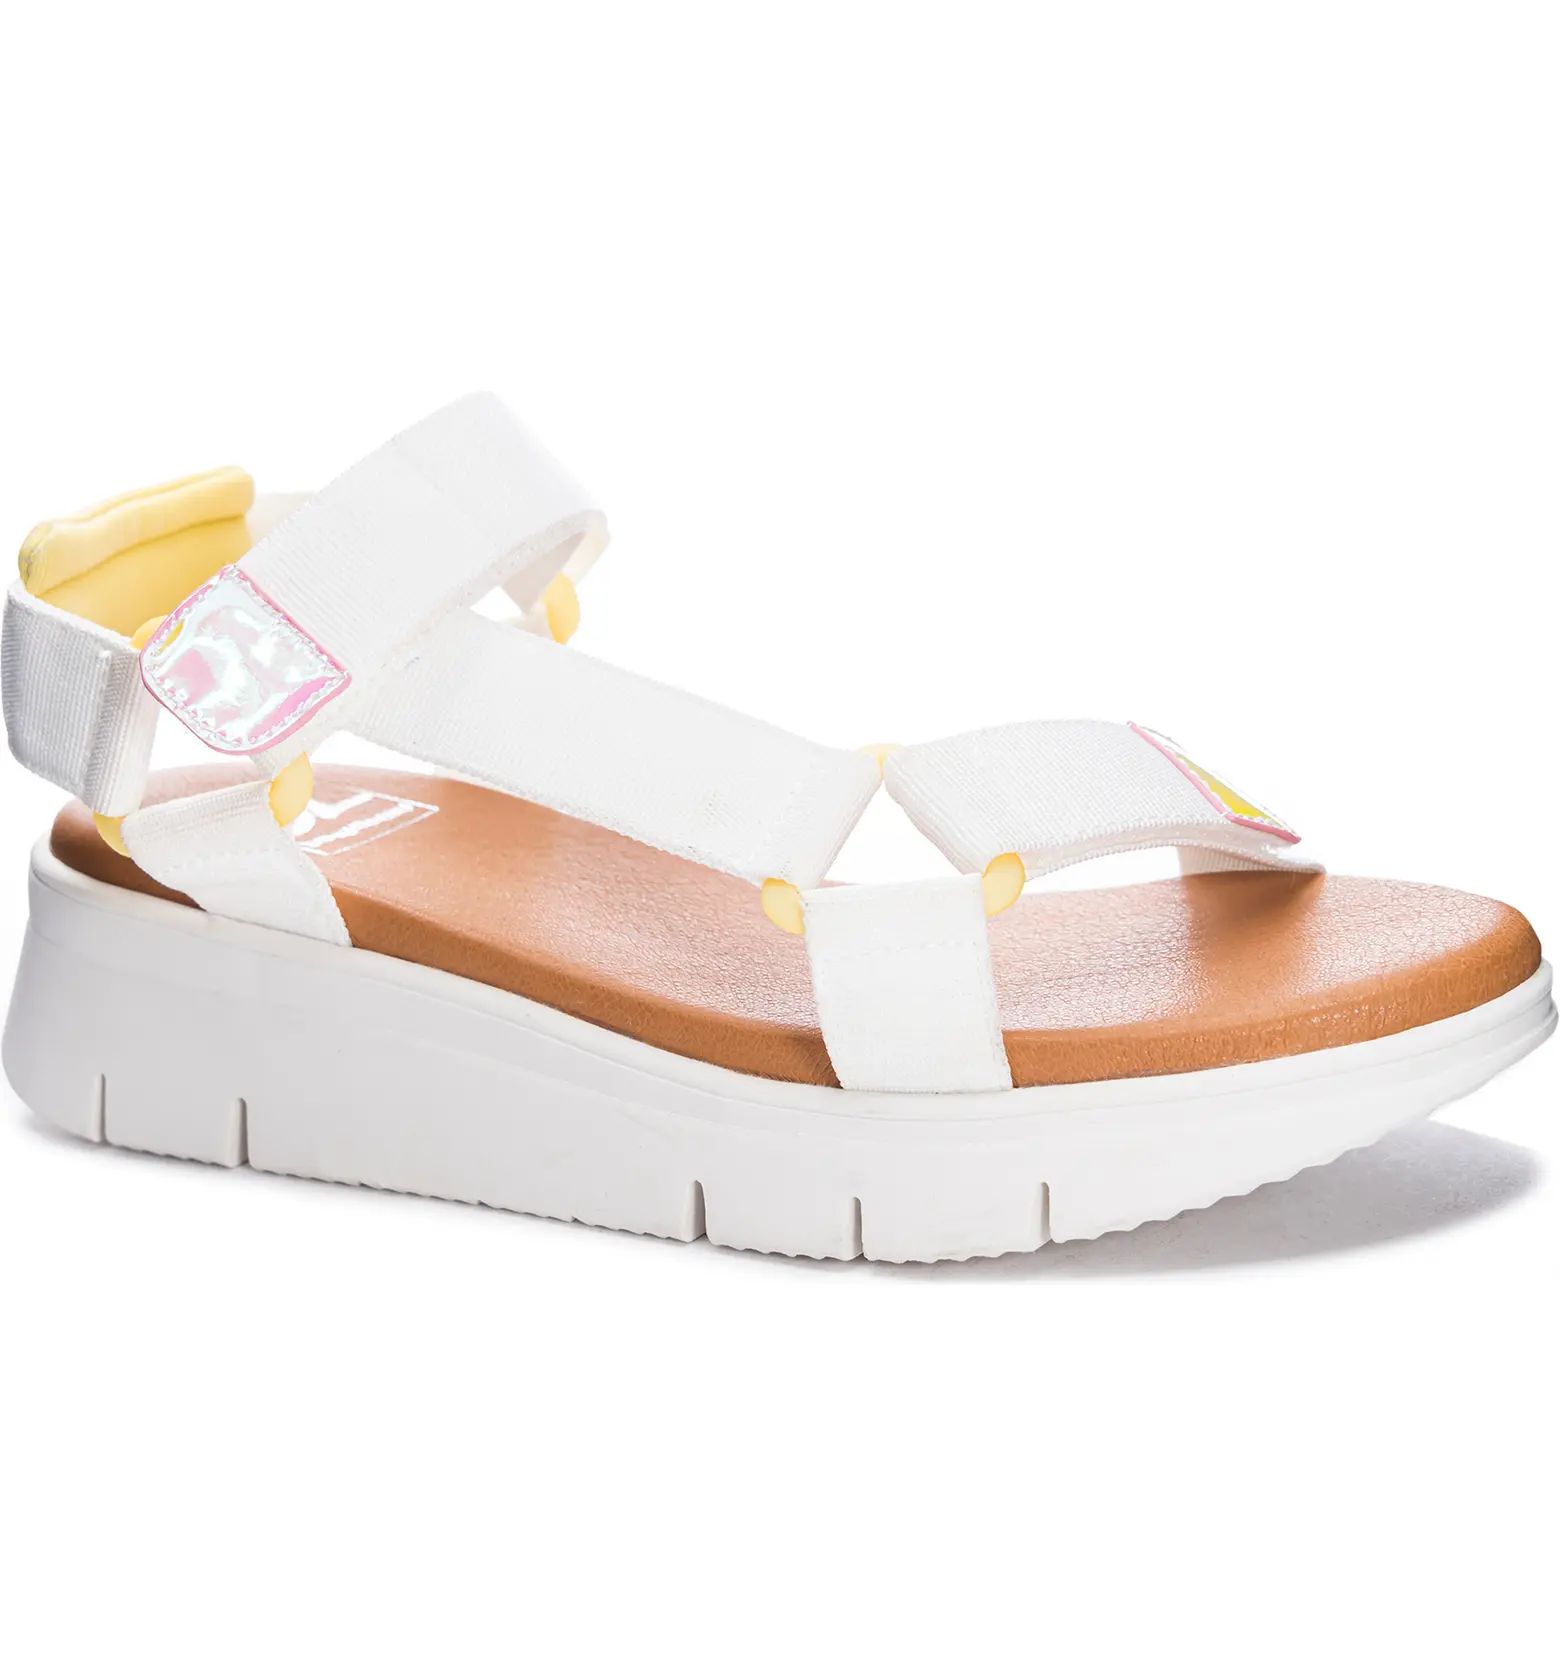 Qwest Strappy Sandal (Women) | Nordstrom